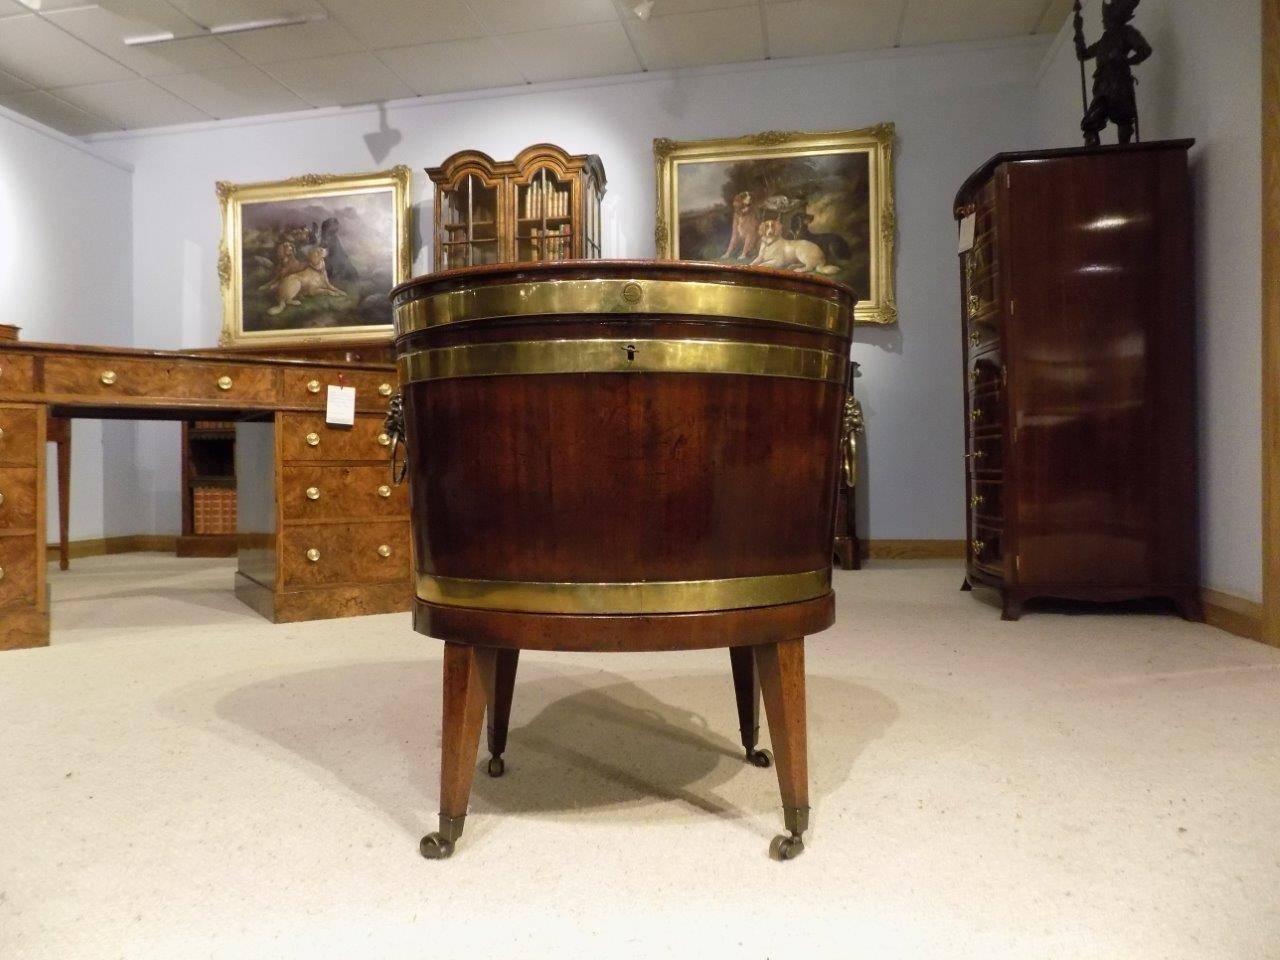 A George III period Cuban mahogany oval lead lined wine cooler. Having an oval hinged top opening to reveal a partially lead lined interior with plug. Retaining the original lions mask handles and supported on the original oval stand with square